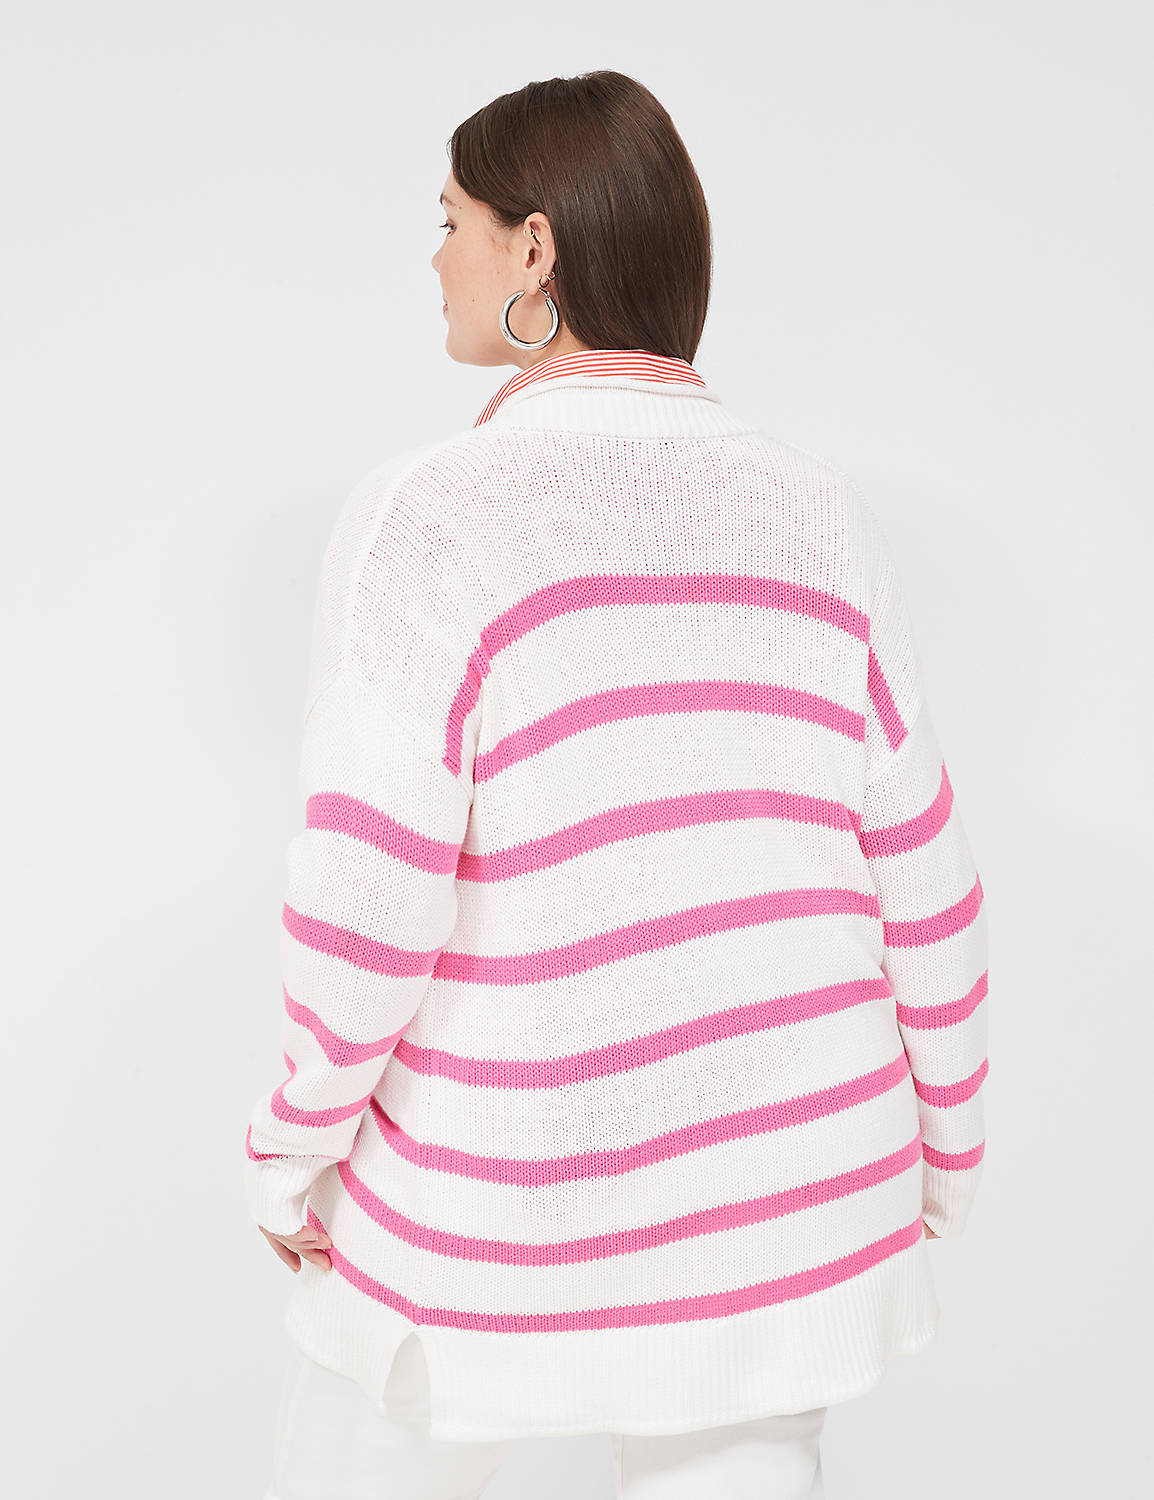 Classic Long Sleeve Striped Open Fr Product Image 2